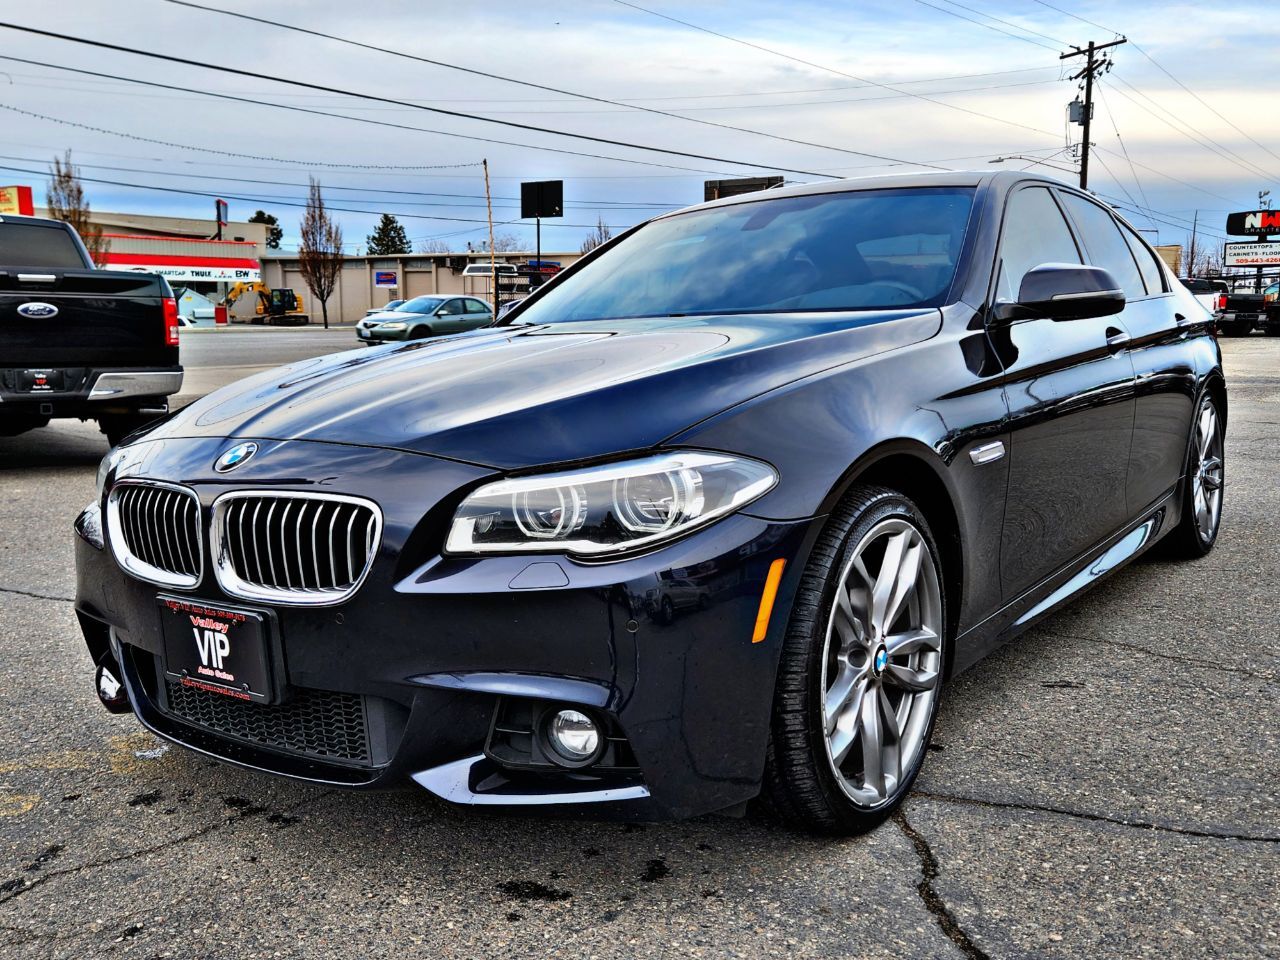 2016 BMW 5 Series For Sale In Pensacola, FL - Carsforsale.com®